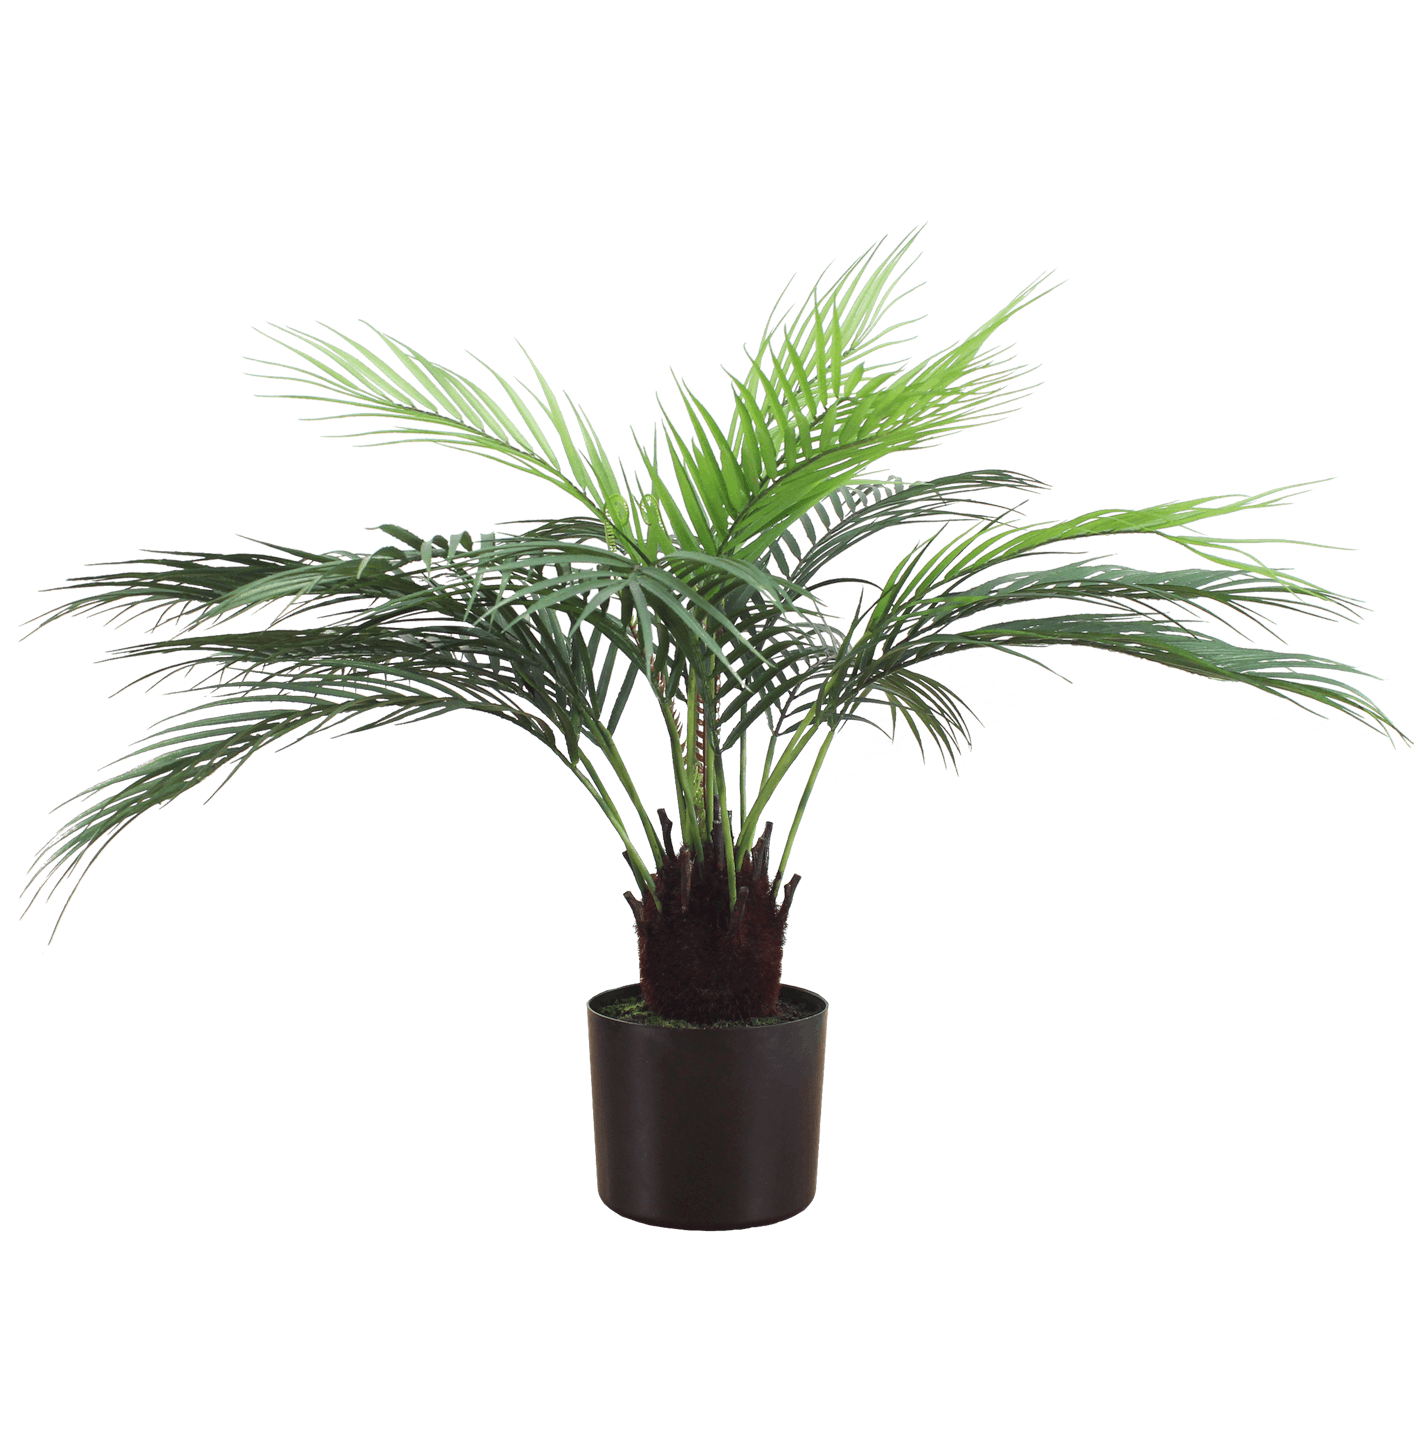 Artificial dicksonia dwarf palm tree by Blooming Artificial